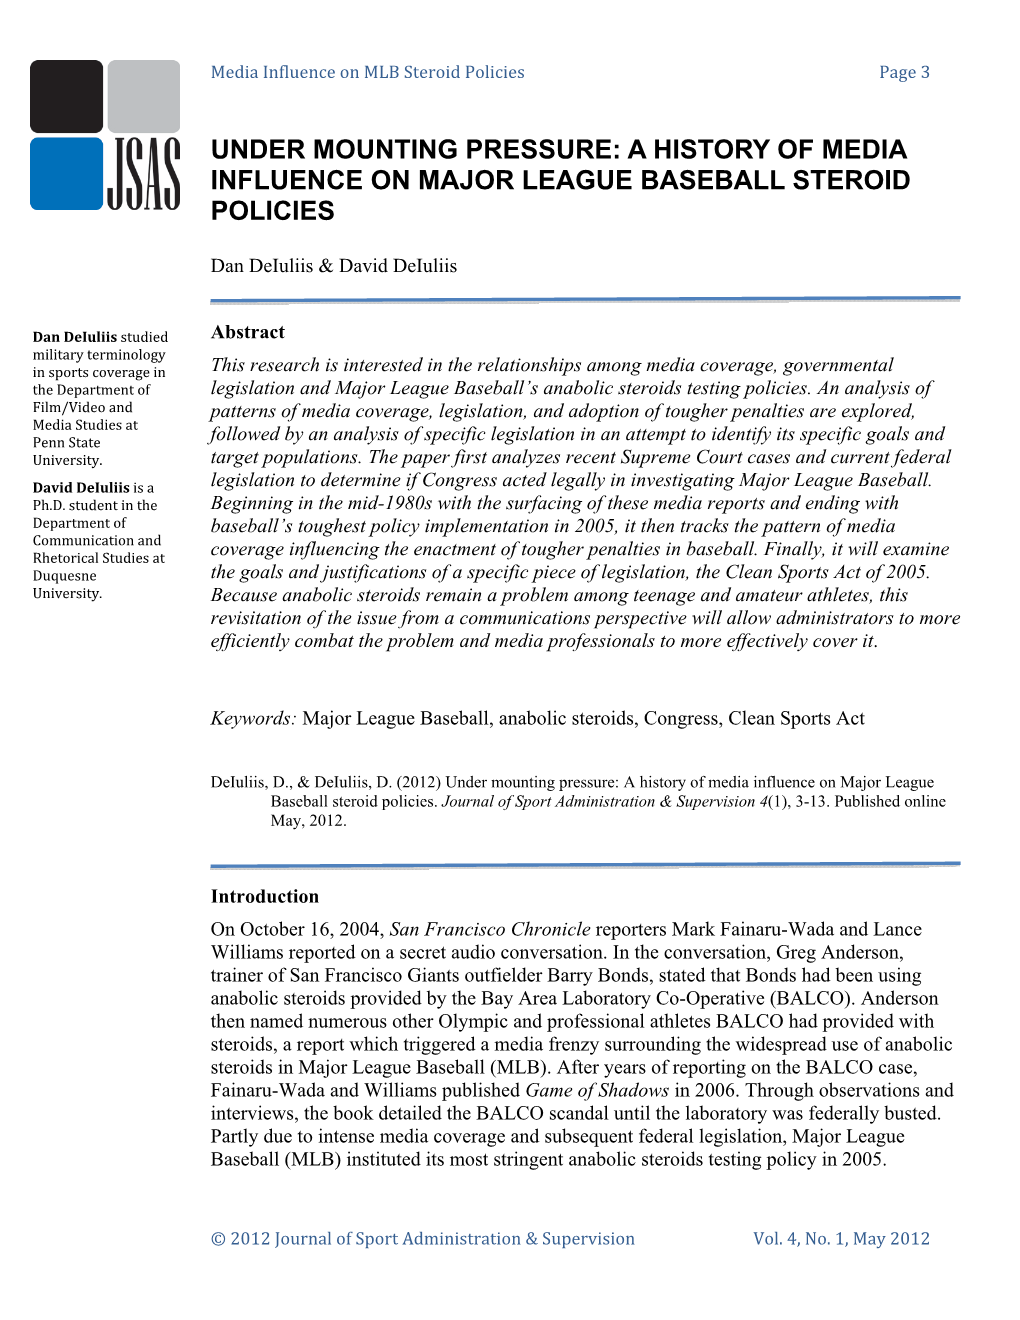 A History of Media Influence on Major League Baseball Steroid Policies